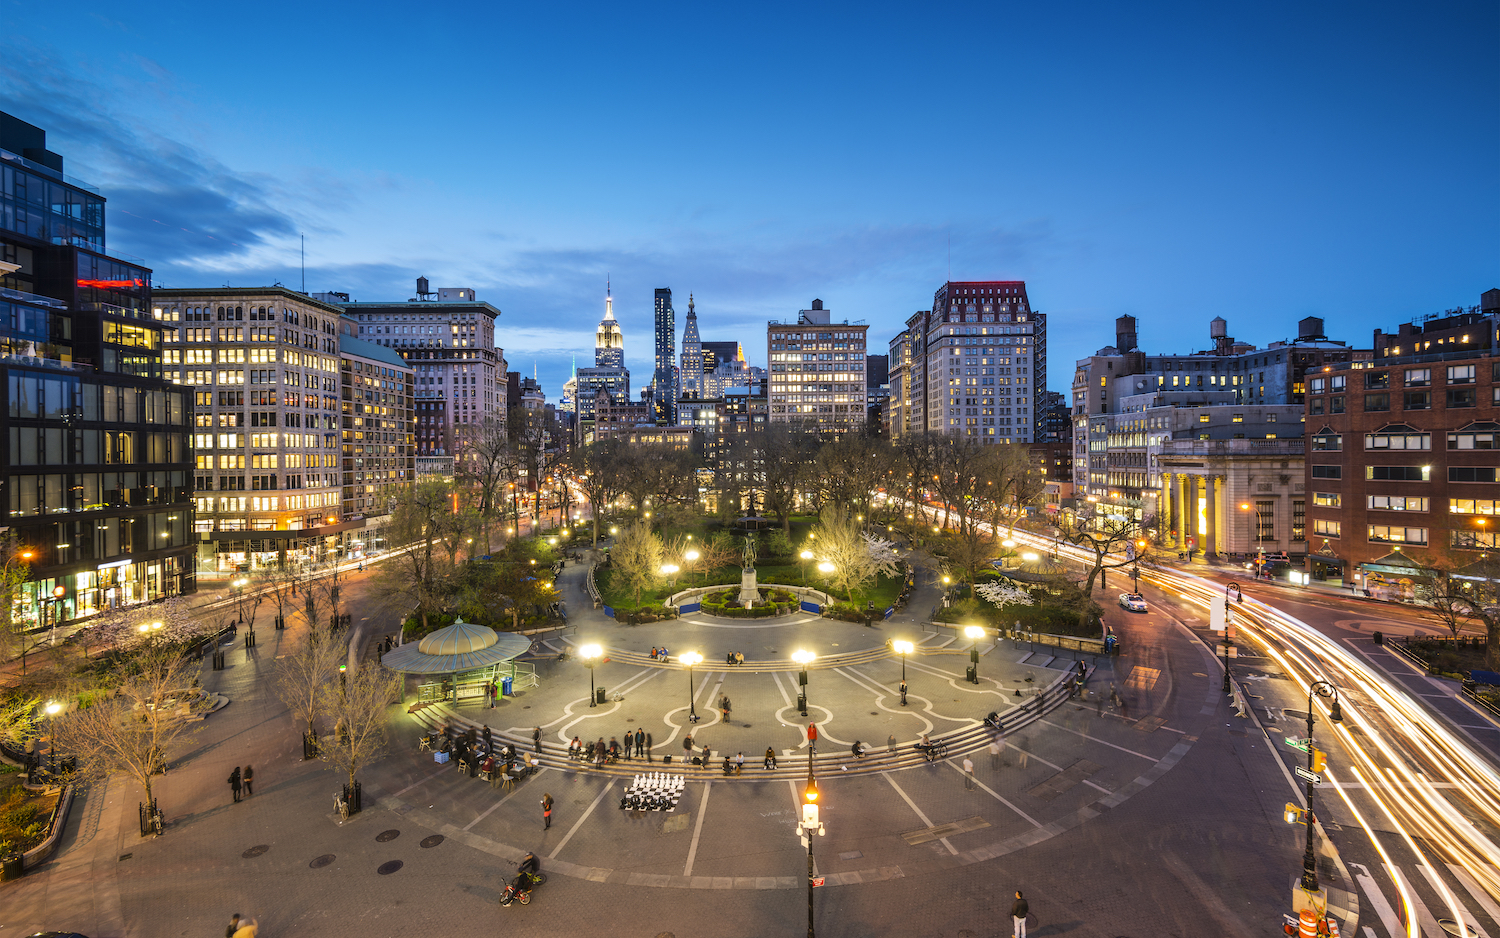 Union Square will debut its first-ever Night Market next month